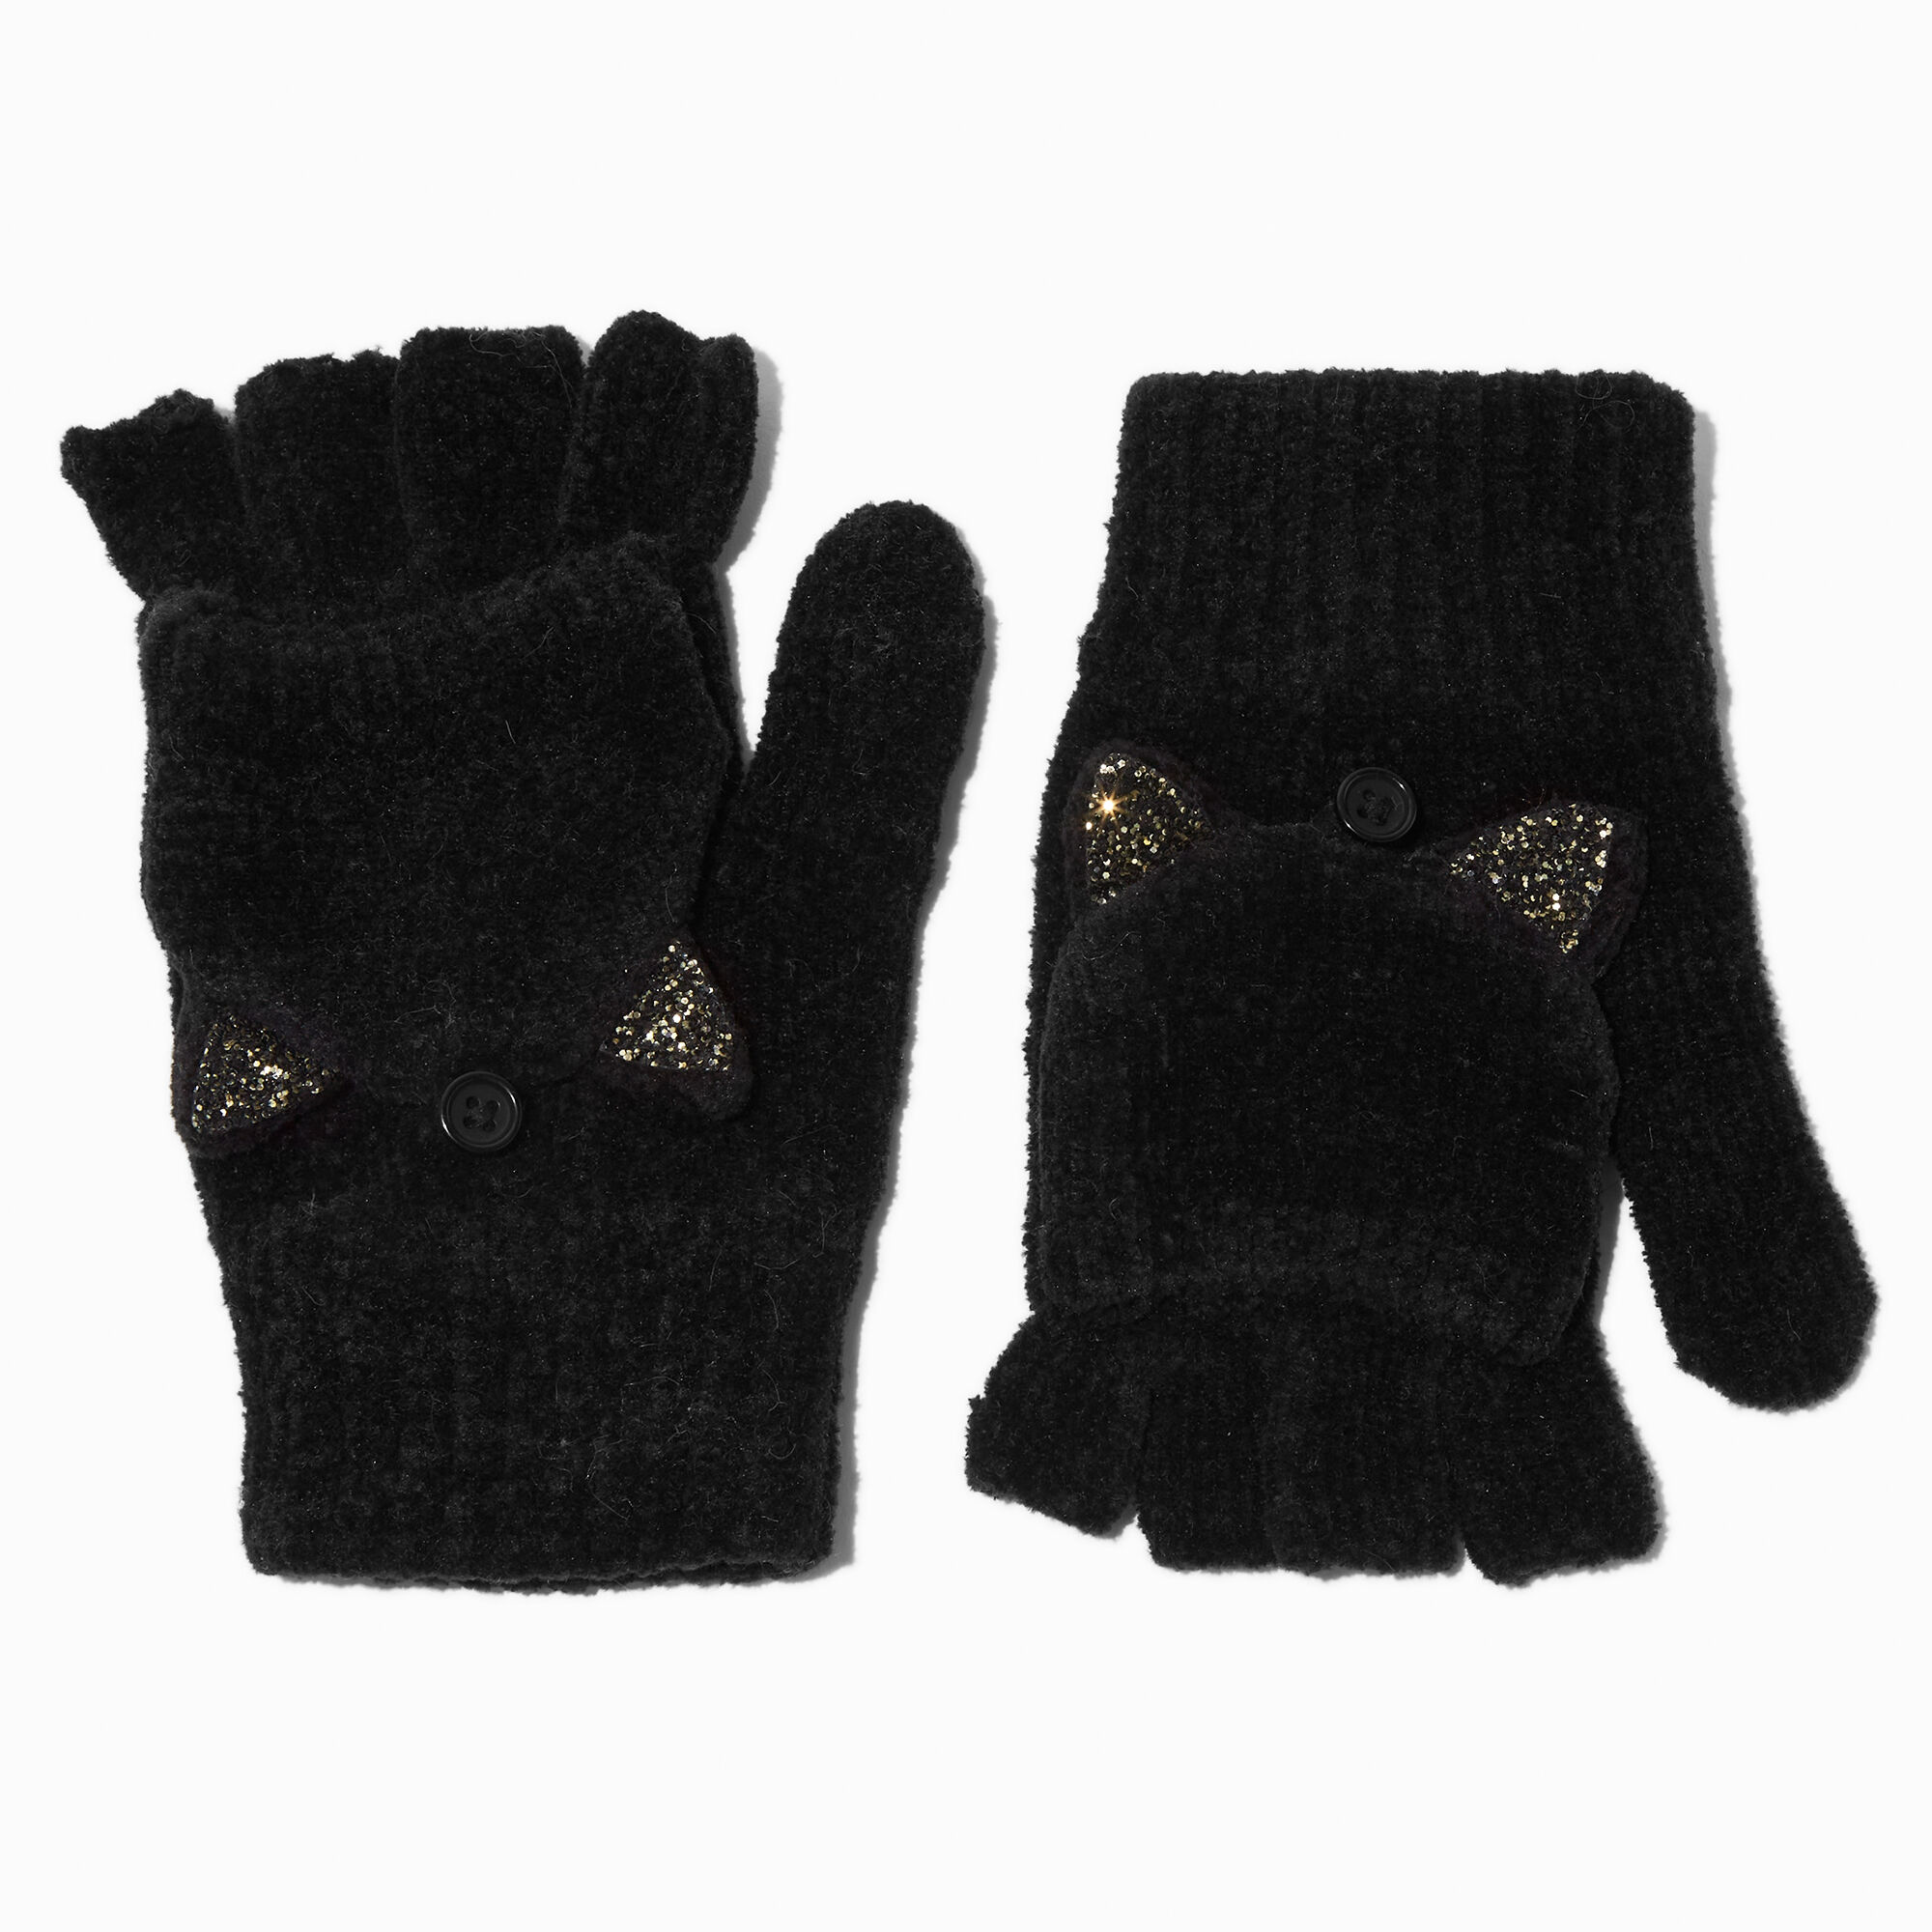 View Claires Cat Convertible Gloves Black information